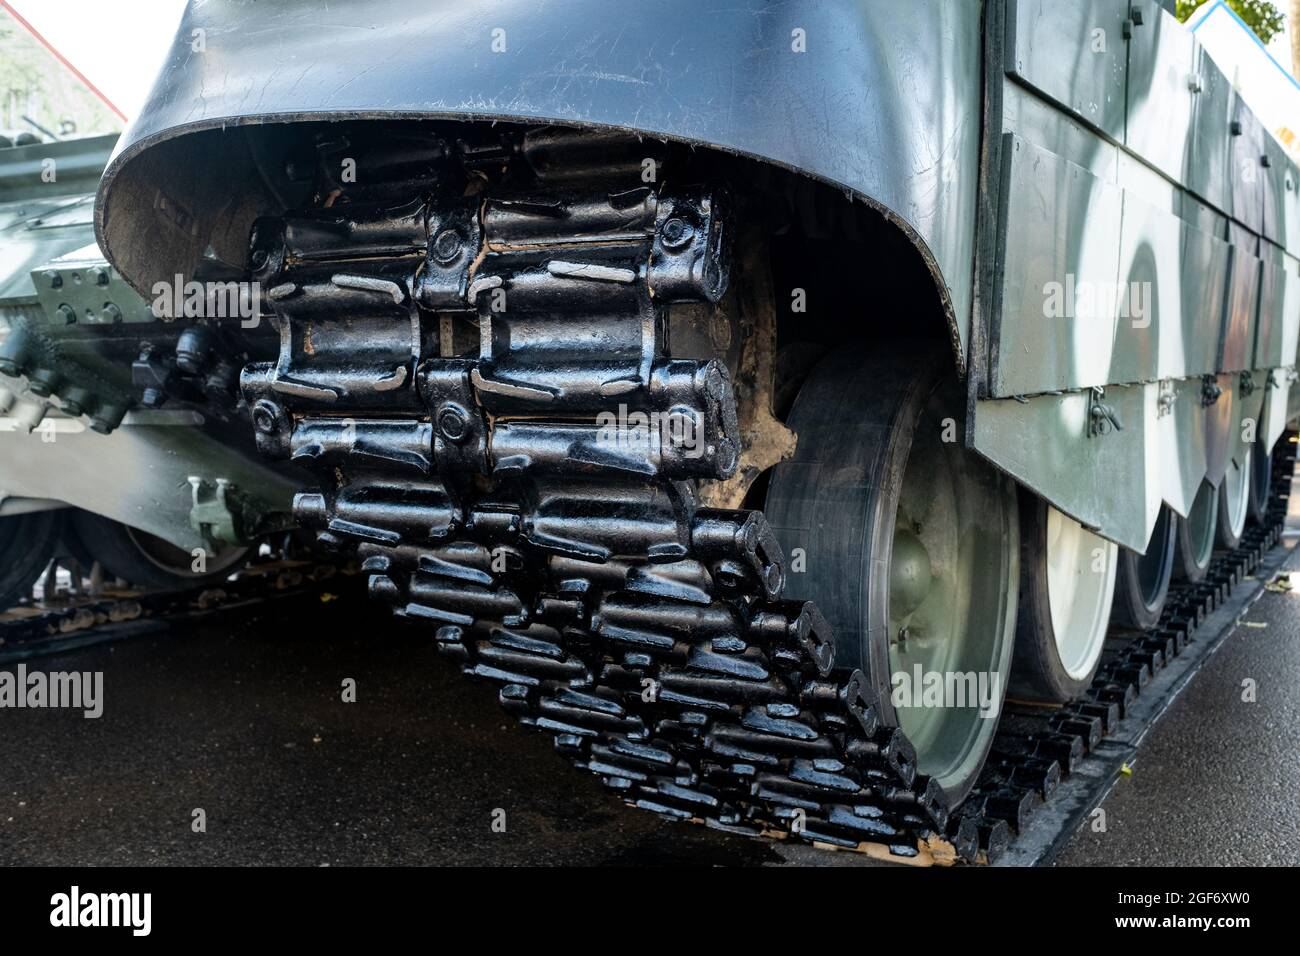 Tracked armor close-up. Black tracks and large rubberized rollers. Tank chassis Stock Photo